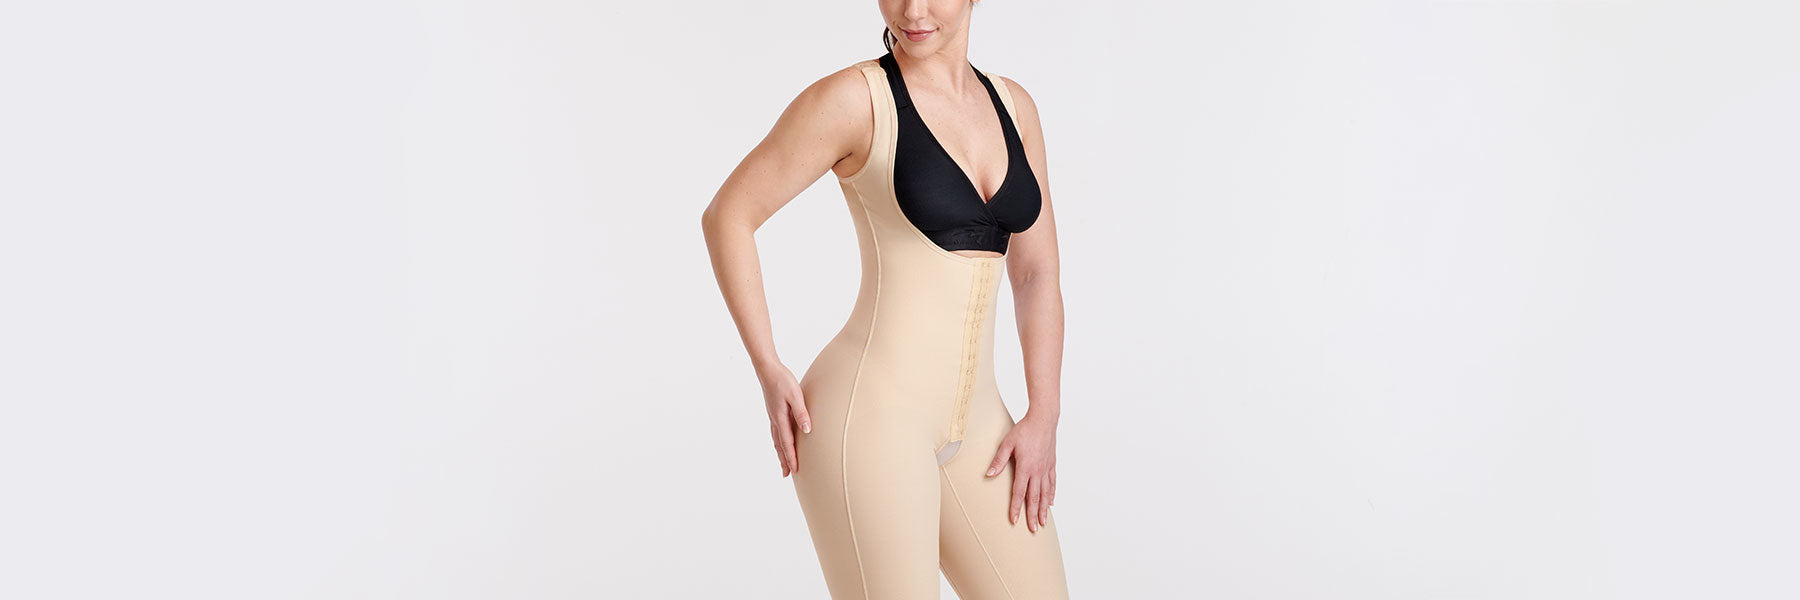 Marena Launches Post-Surgical Compression Garment  Uniquely Designed for the Naturally Curvy Body Type